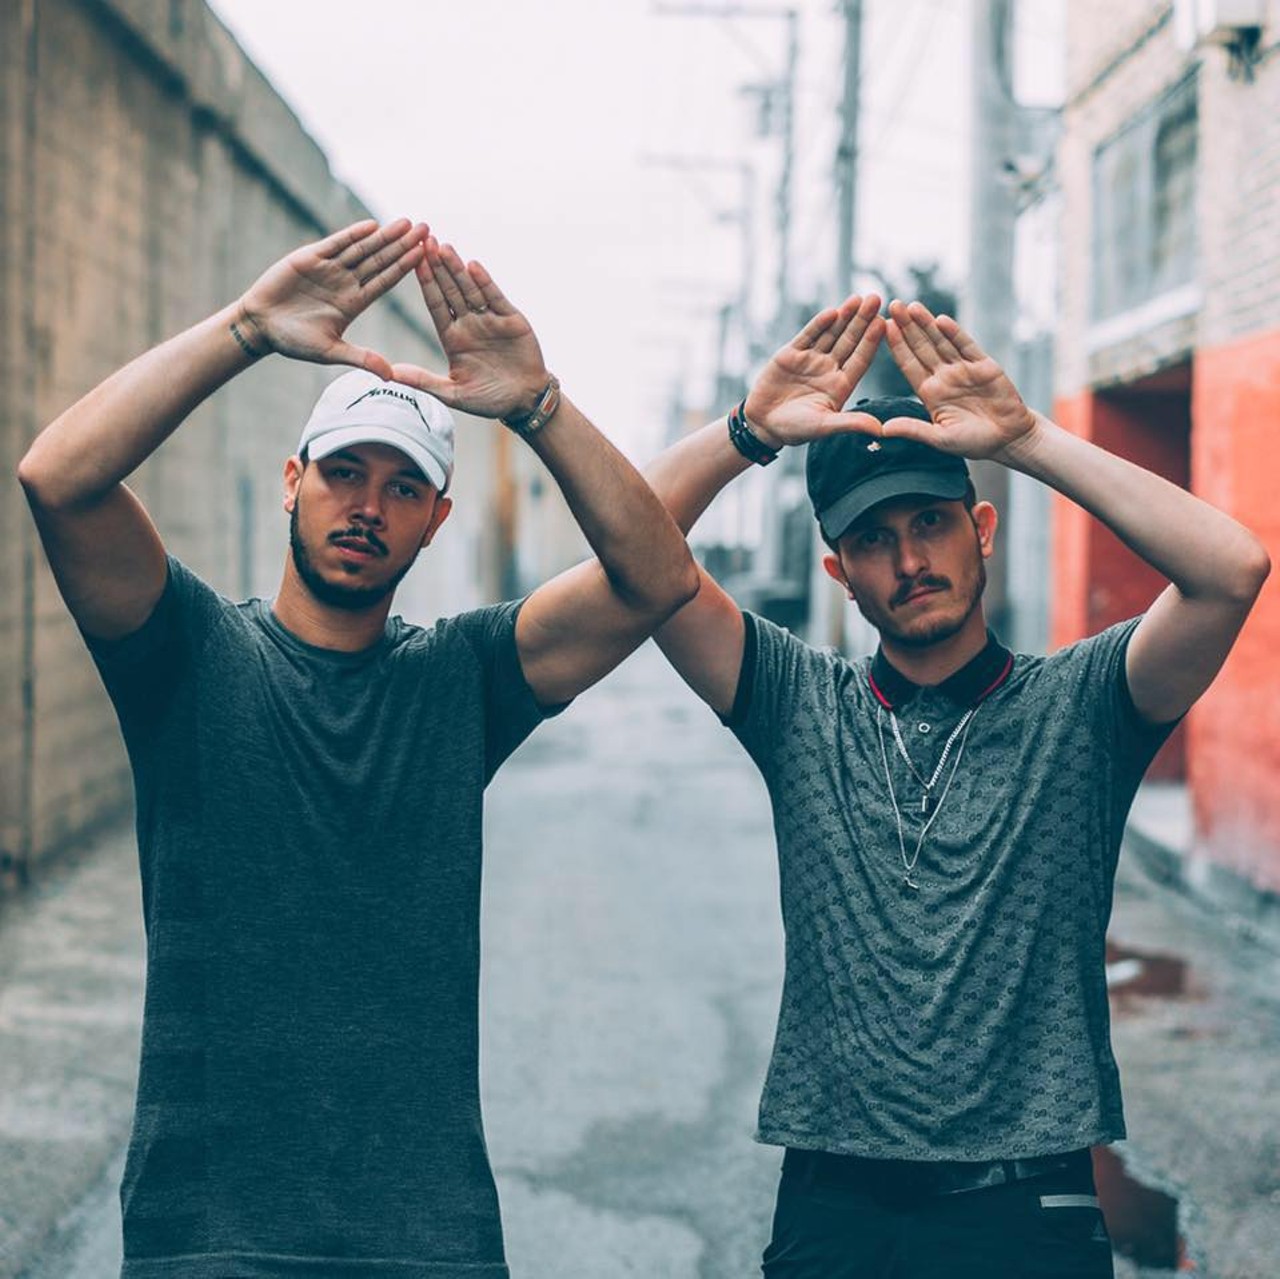 Saturday, 11/19
Flosstradamus 
@The Masonic Temple
After performing at Panorama, Lollapalooza, Bonnaroo, and headlining at HDYFEST, hip-hop duo Flosstradamus will bring their tour &#151; and their &#147;bunker stage,&#148; which features real cannons &#151; to Detroit. Emerging from Chicago&#146;s hip-hop and trap scene, which they certainly helped to revitalize among youth who had found it to be inaccessible, Flosstradamus has been able to make a name for themselves past city limits. After their successful single and almost love song to their hometown, &#147;Came Up,&#148; the group is getting more and more recognition, and will definitely be a treat for Detroiters. 
Doors open at 8 p.m.; 500 Temple St., Detroit; themasonic.com; Tickets are $35 in advance and $45 the day of.